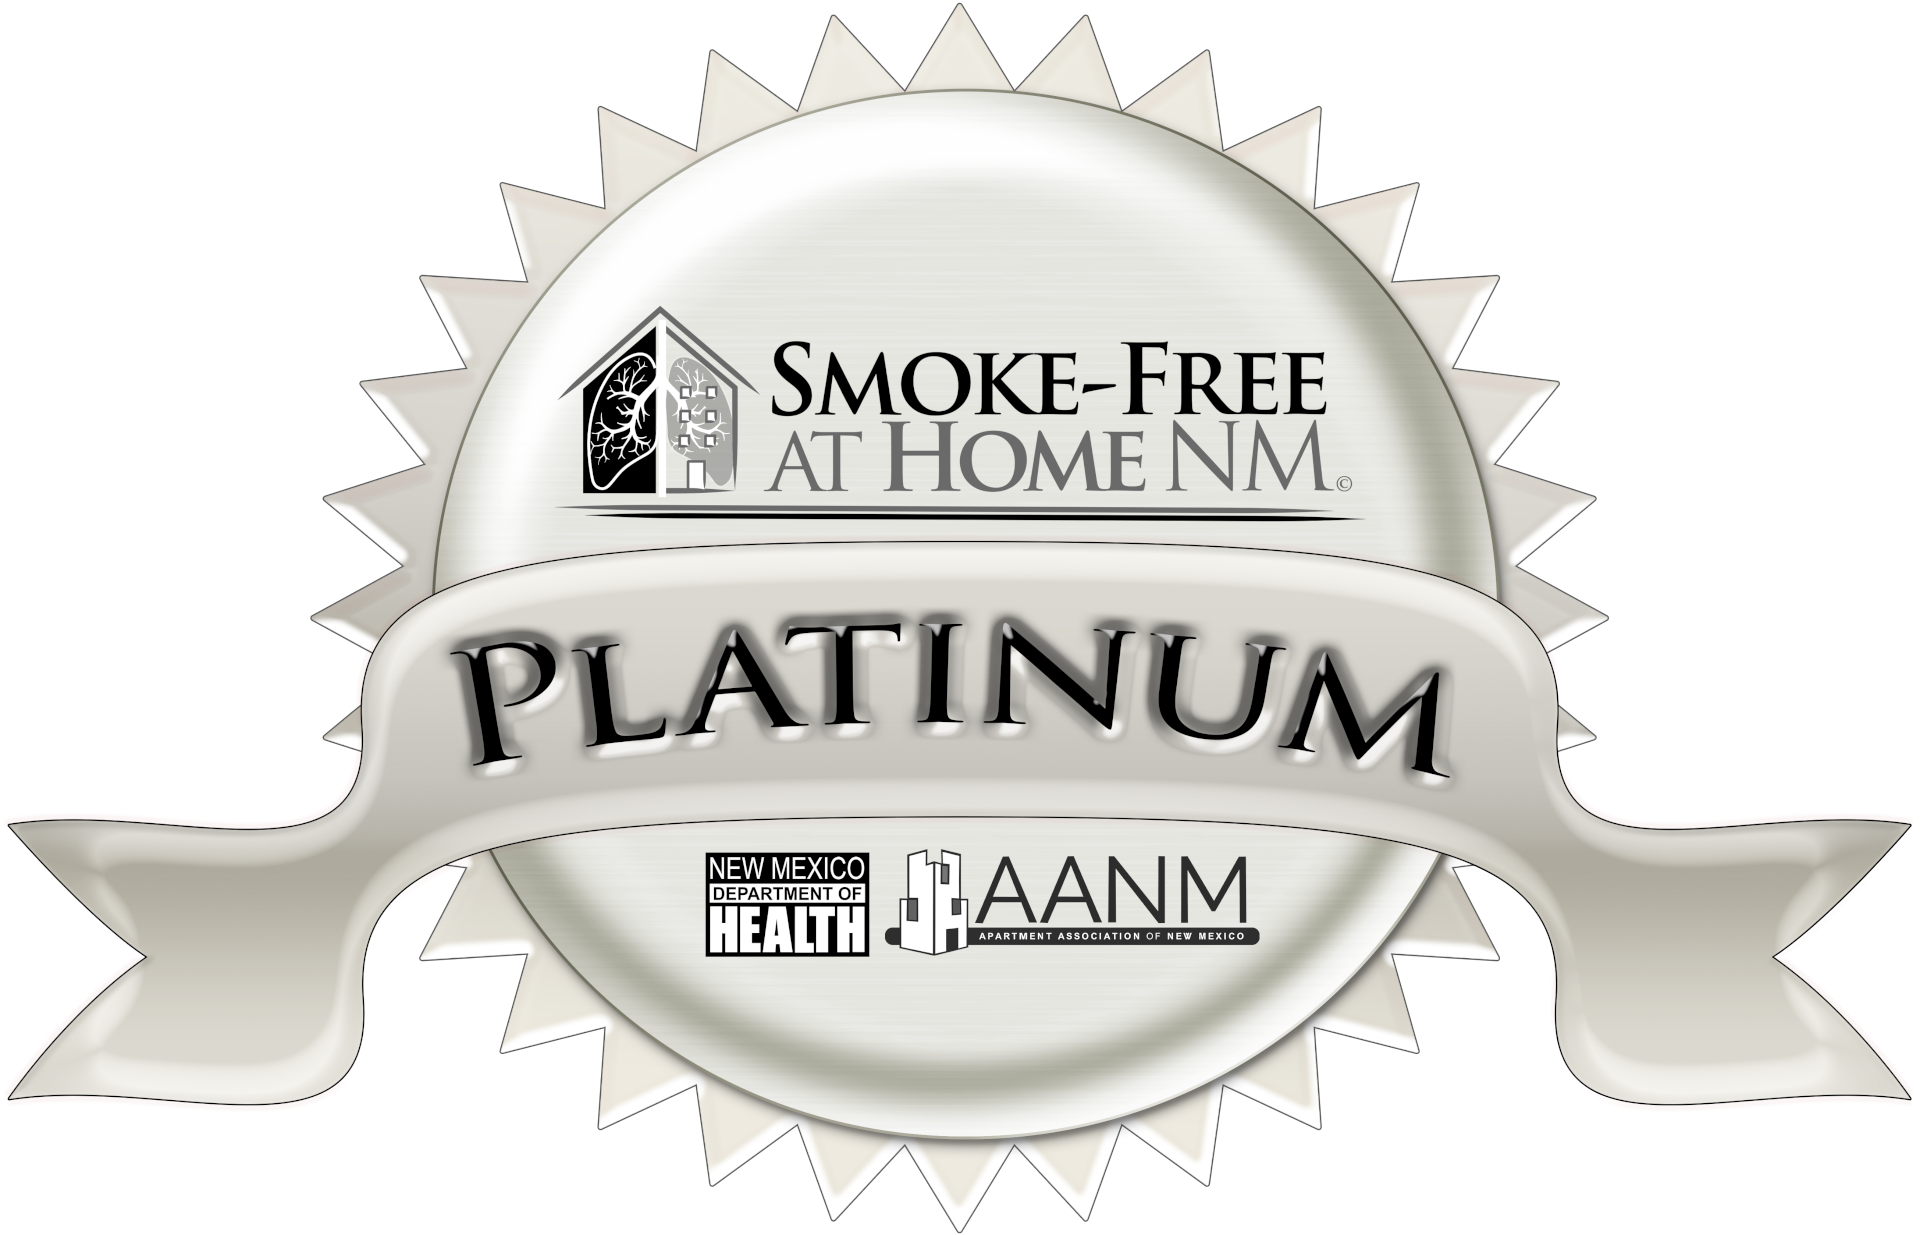 Platinum: A new Property or Development that does not allow any smoking, including electronic cigarettes, on any part of the property at any time.